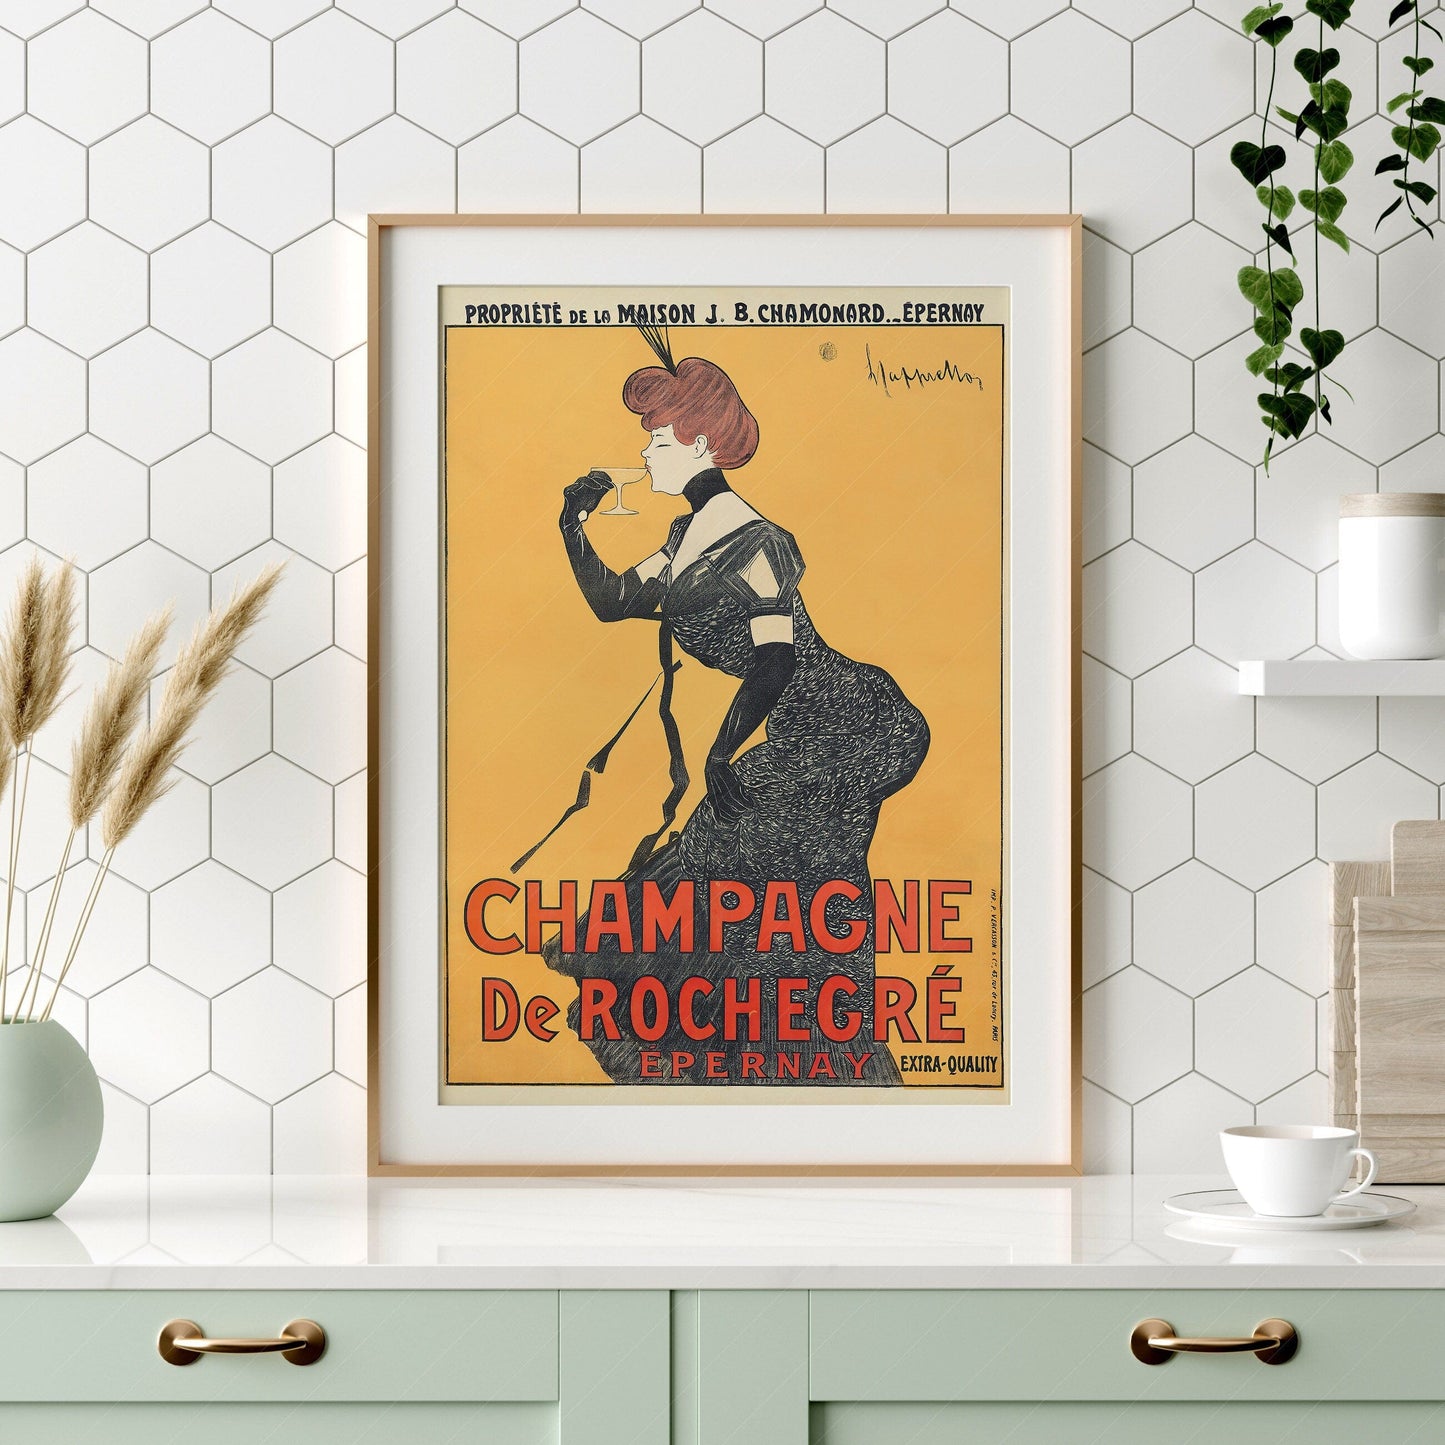 Home Poster Decor Champagne de Rochegre, Vintage Advertising, Drink Poster, Party Wall Decor, Wine Art Print, Elegant Woman, Bar French Girl, Celebrate Bubbly